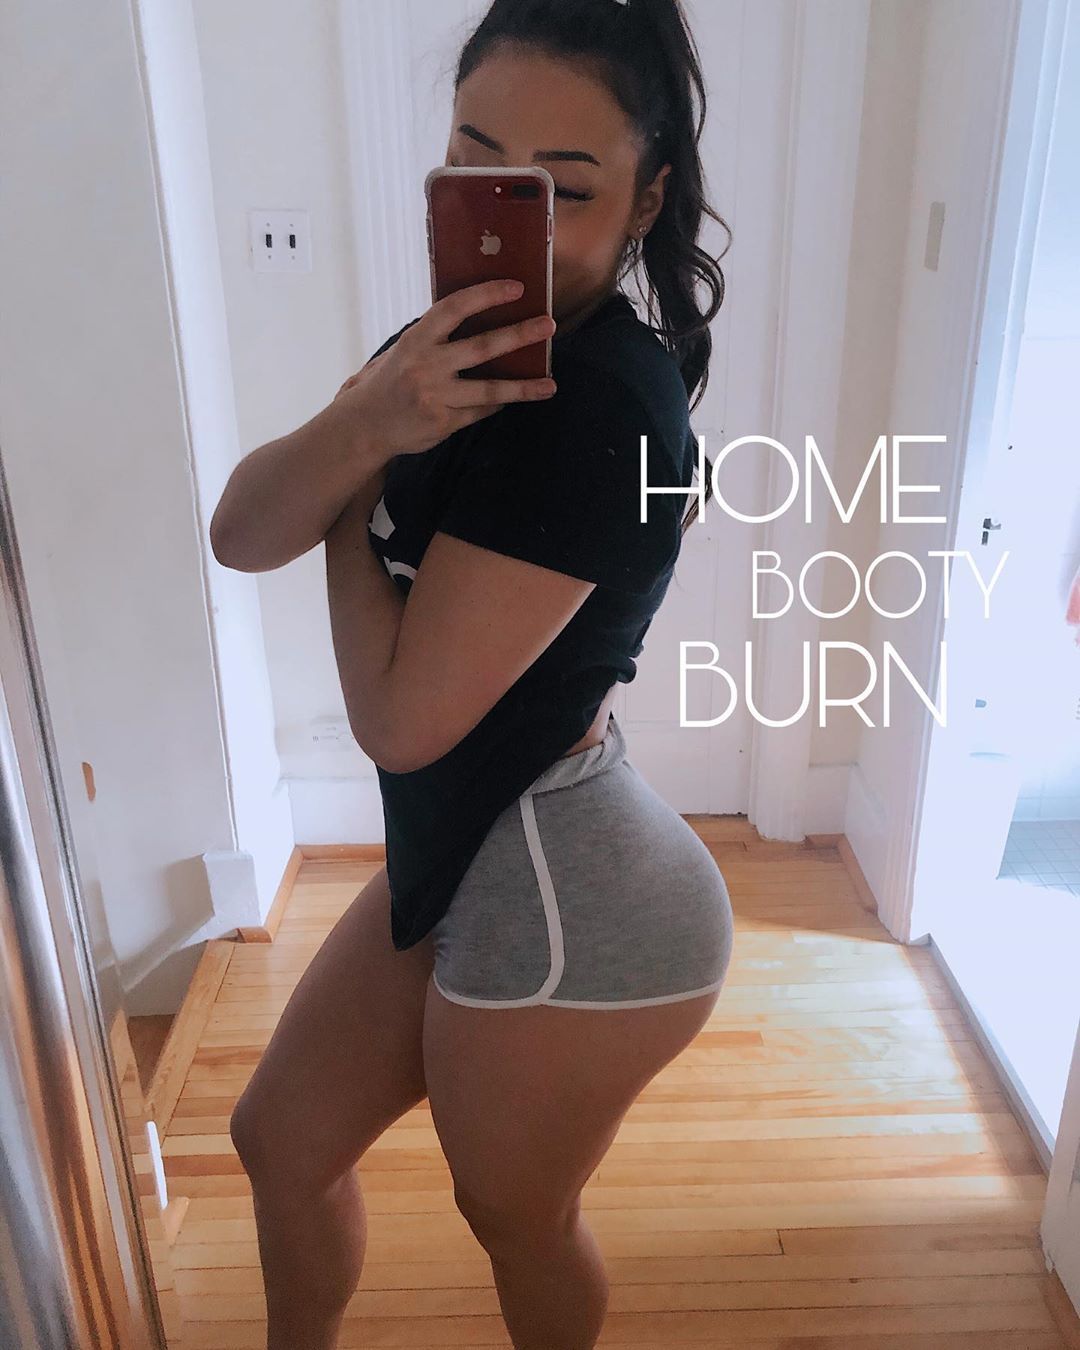 bill mccoog recommends Home Booty Pics